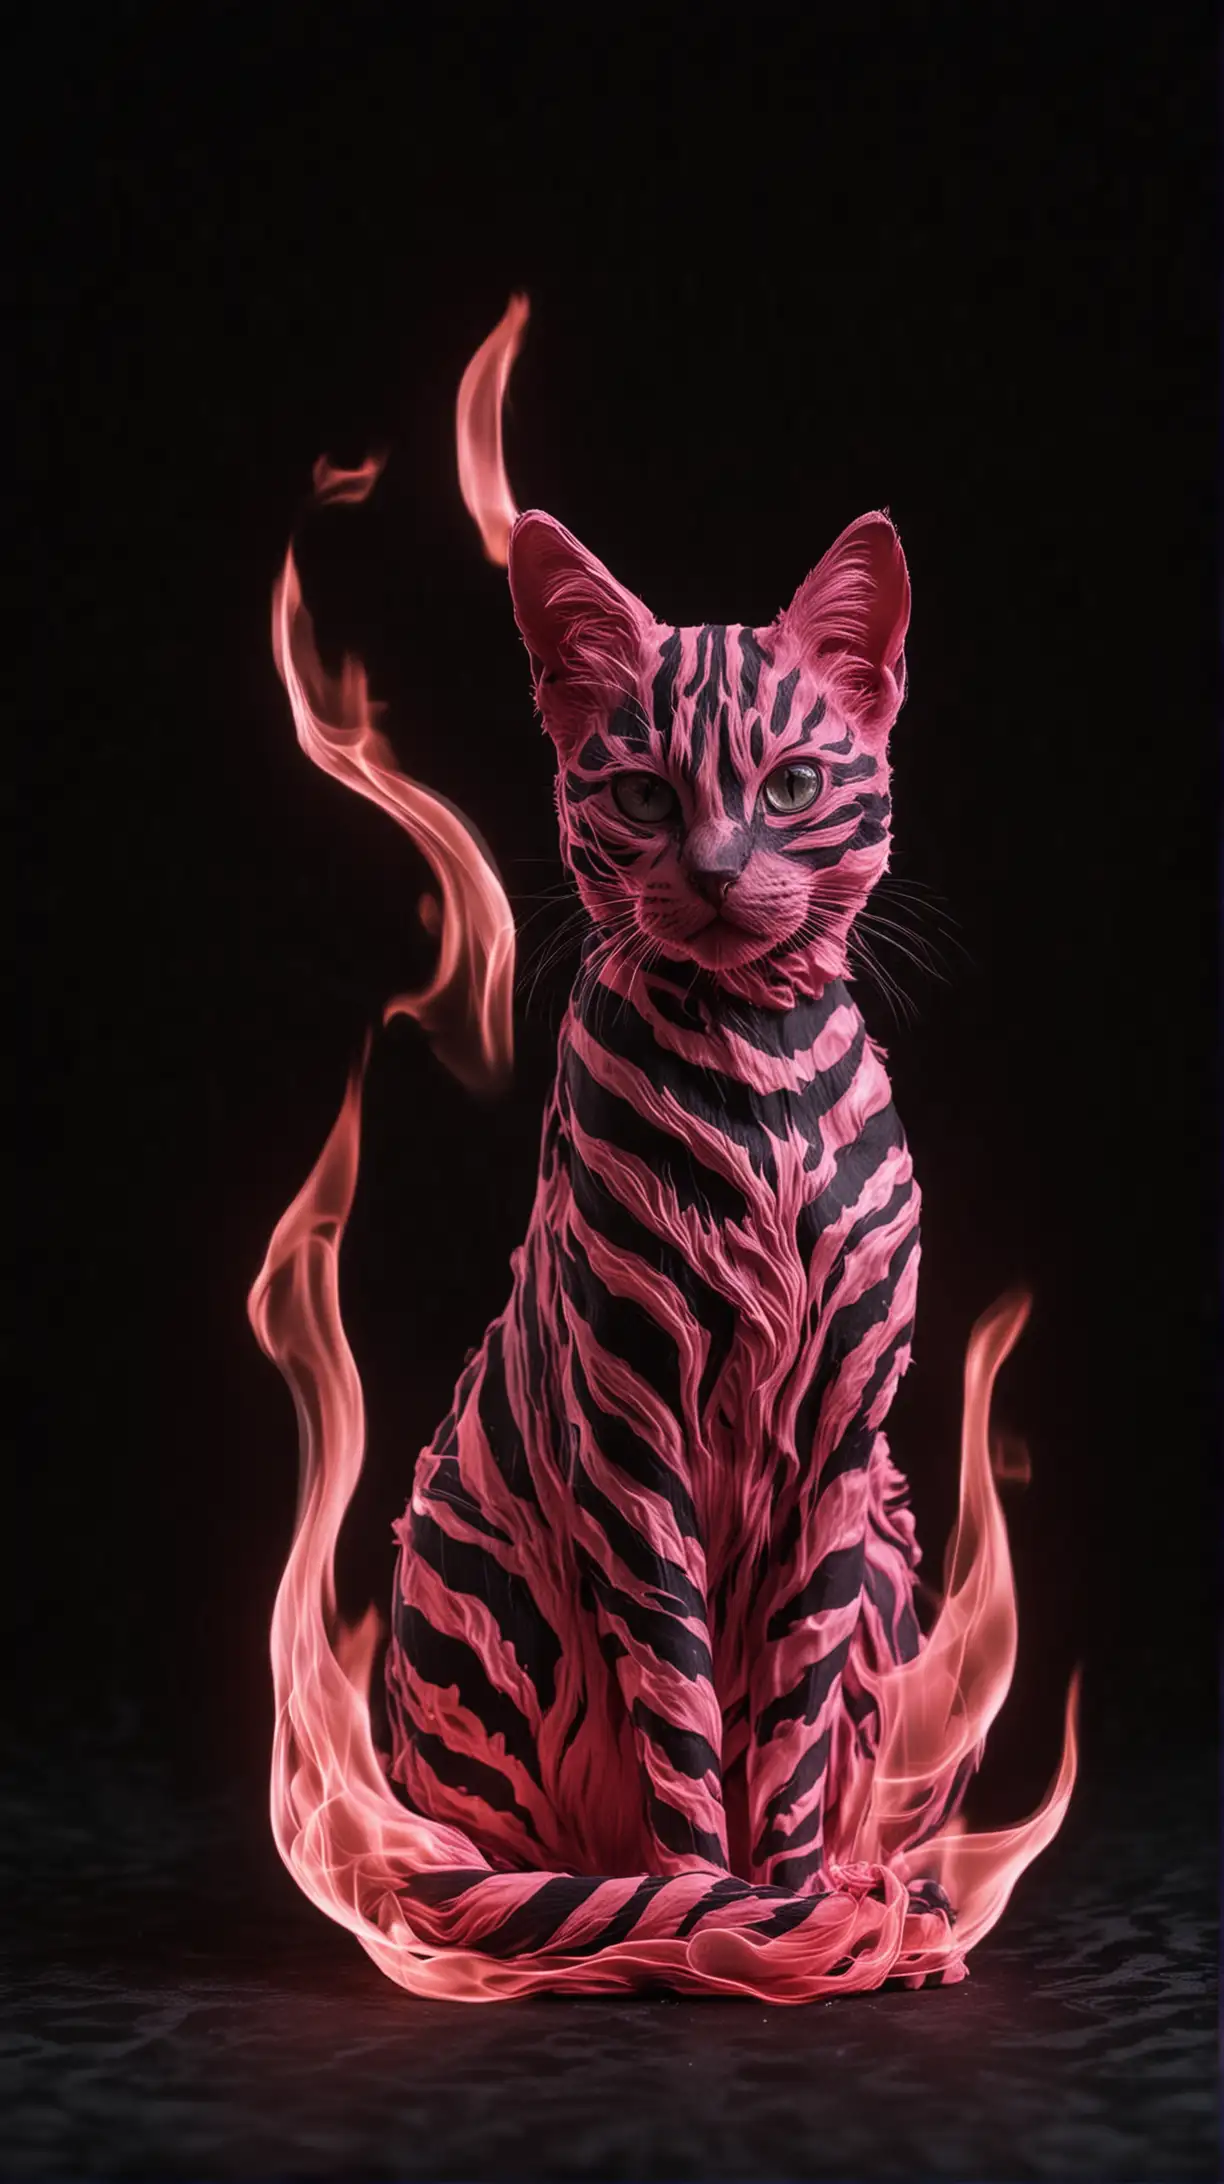 Ethereal Pink Cat Flame Dancing Against a Striking Black Striped Backdrop